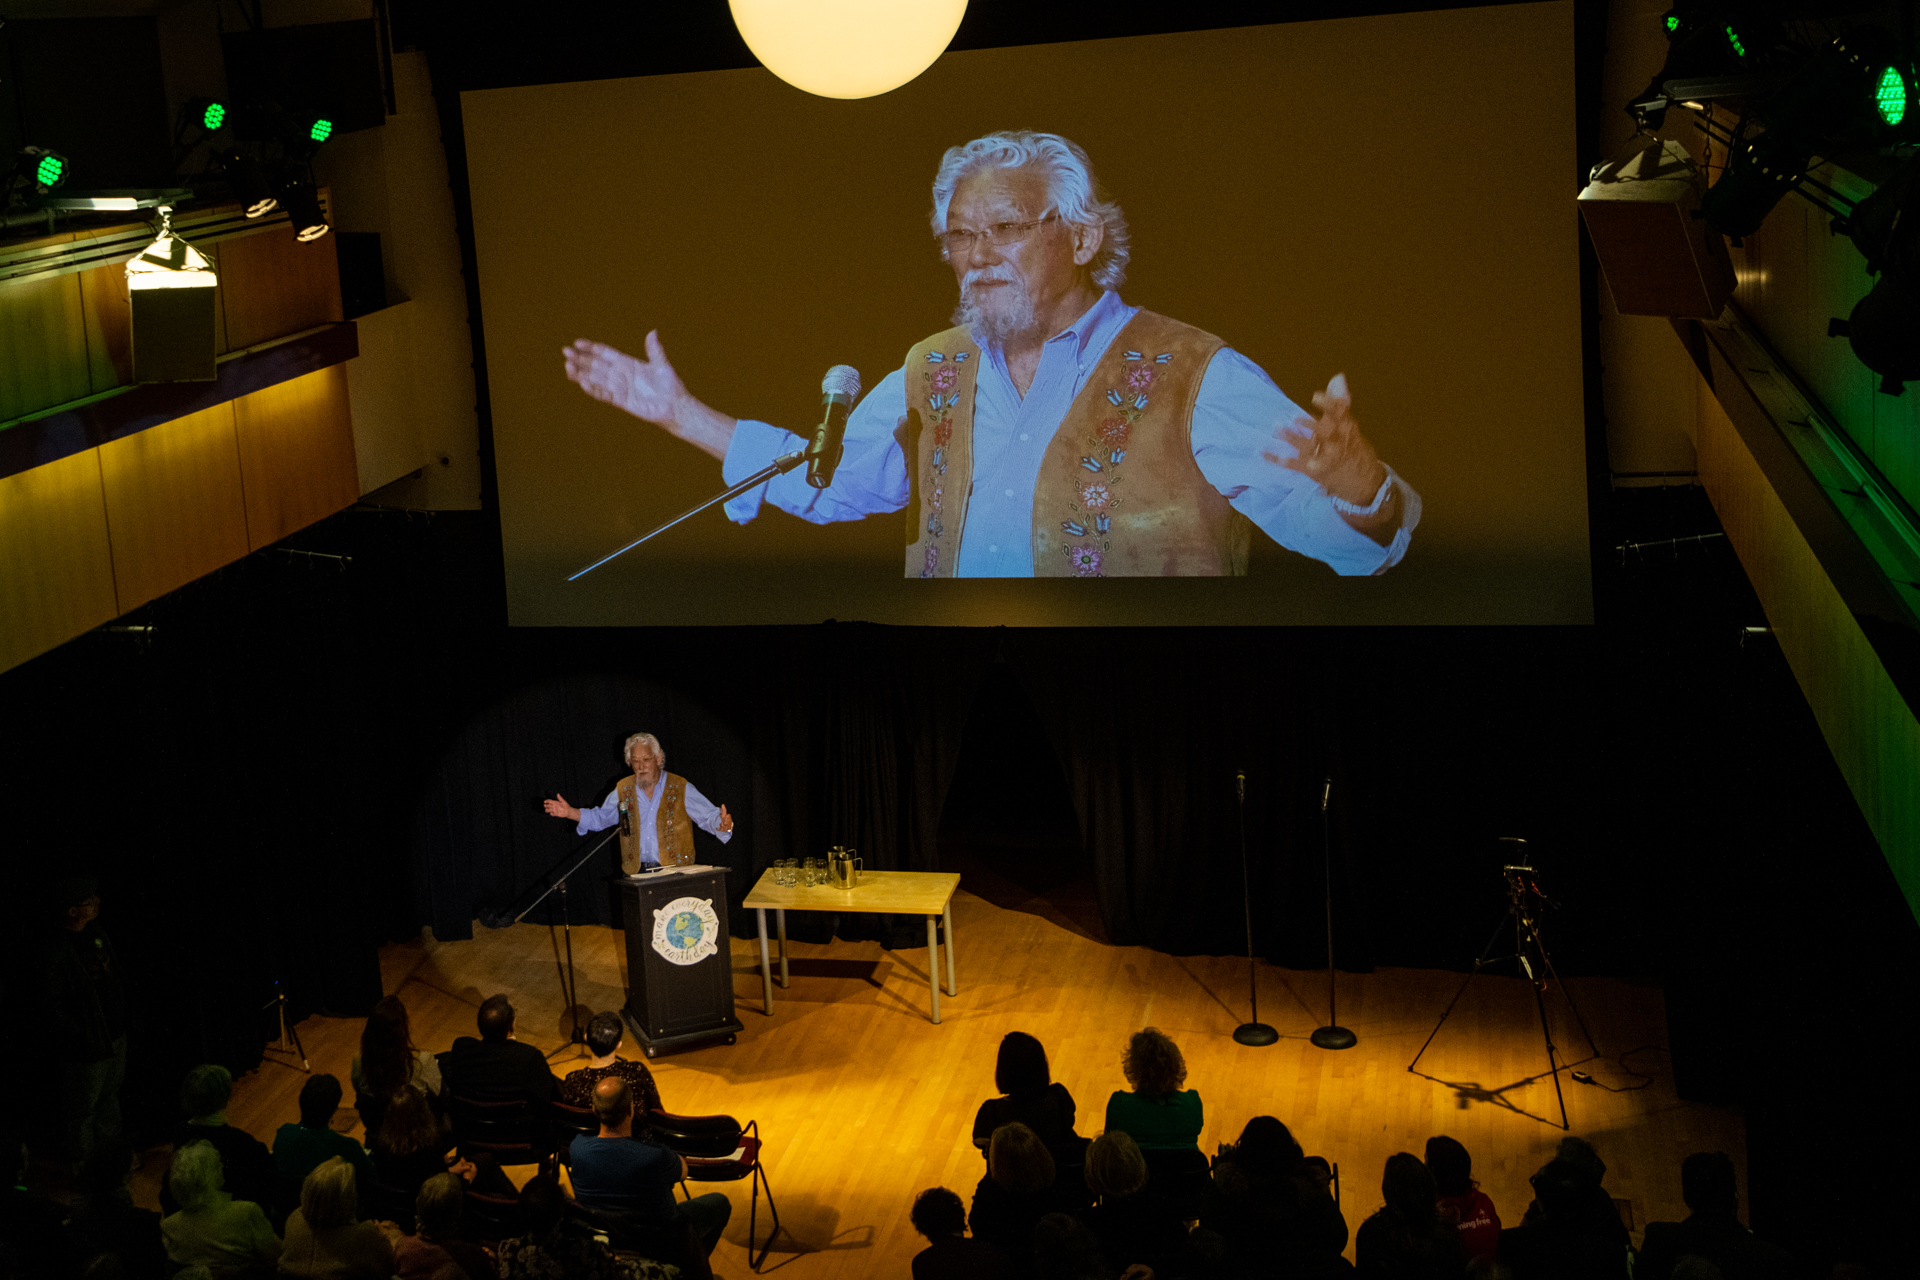 David Suzuki speaking at the Green Party gathering at the Lebovic Centre for Arts & Entertainment in Whitchurch-Stouffville, Ontario, Canada.